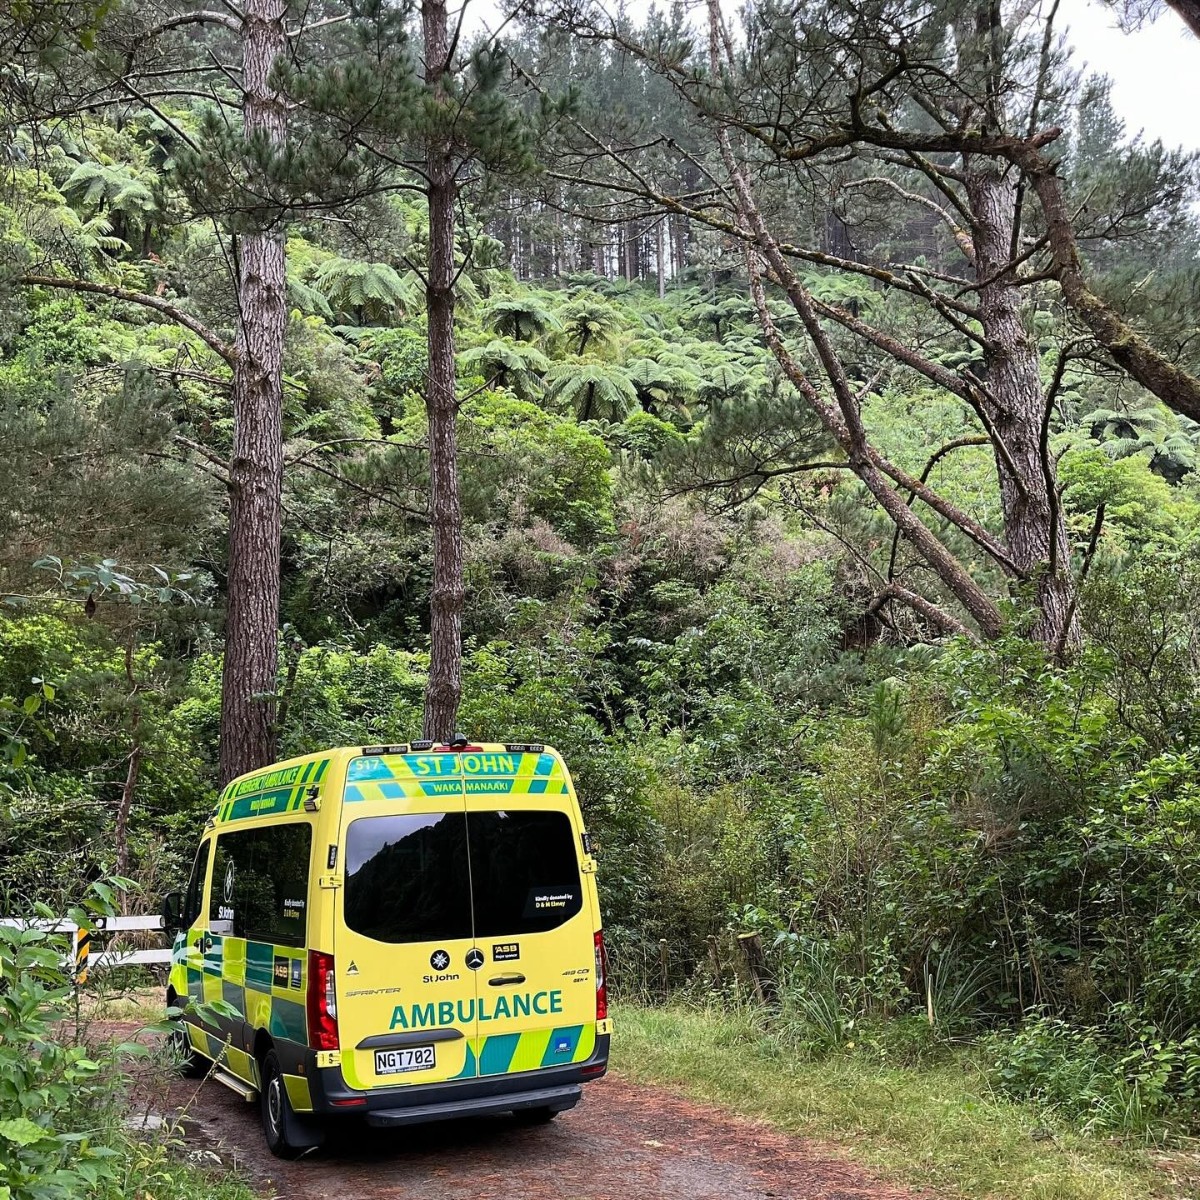 Levin the dream in New Zealand 😎 Our Levin1 ambulance out in nature 🌲 📸 Jordan #NewZealand #NZ #Ambulance #StJohn #Forest #Nature #Travel #Trees #Health